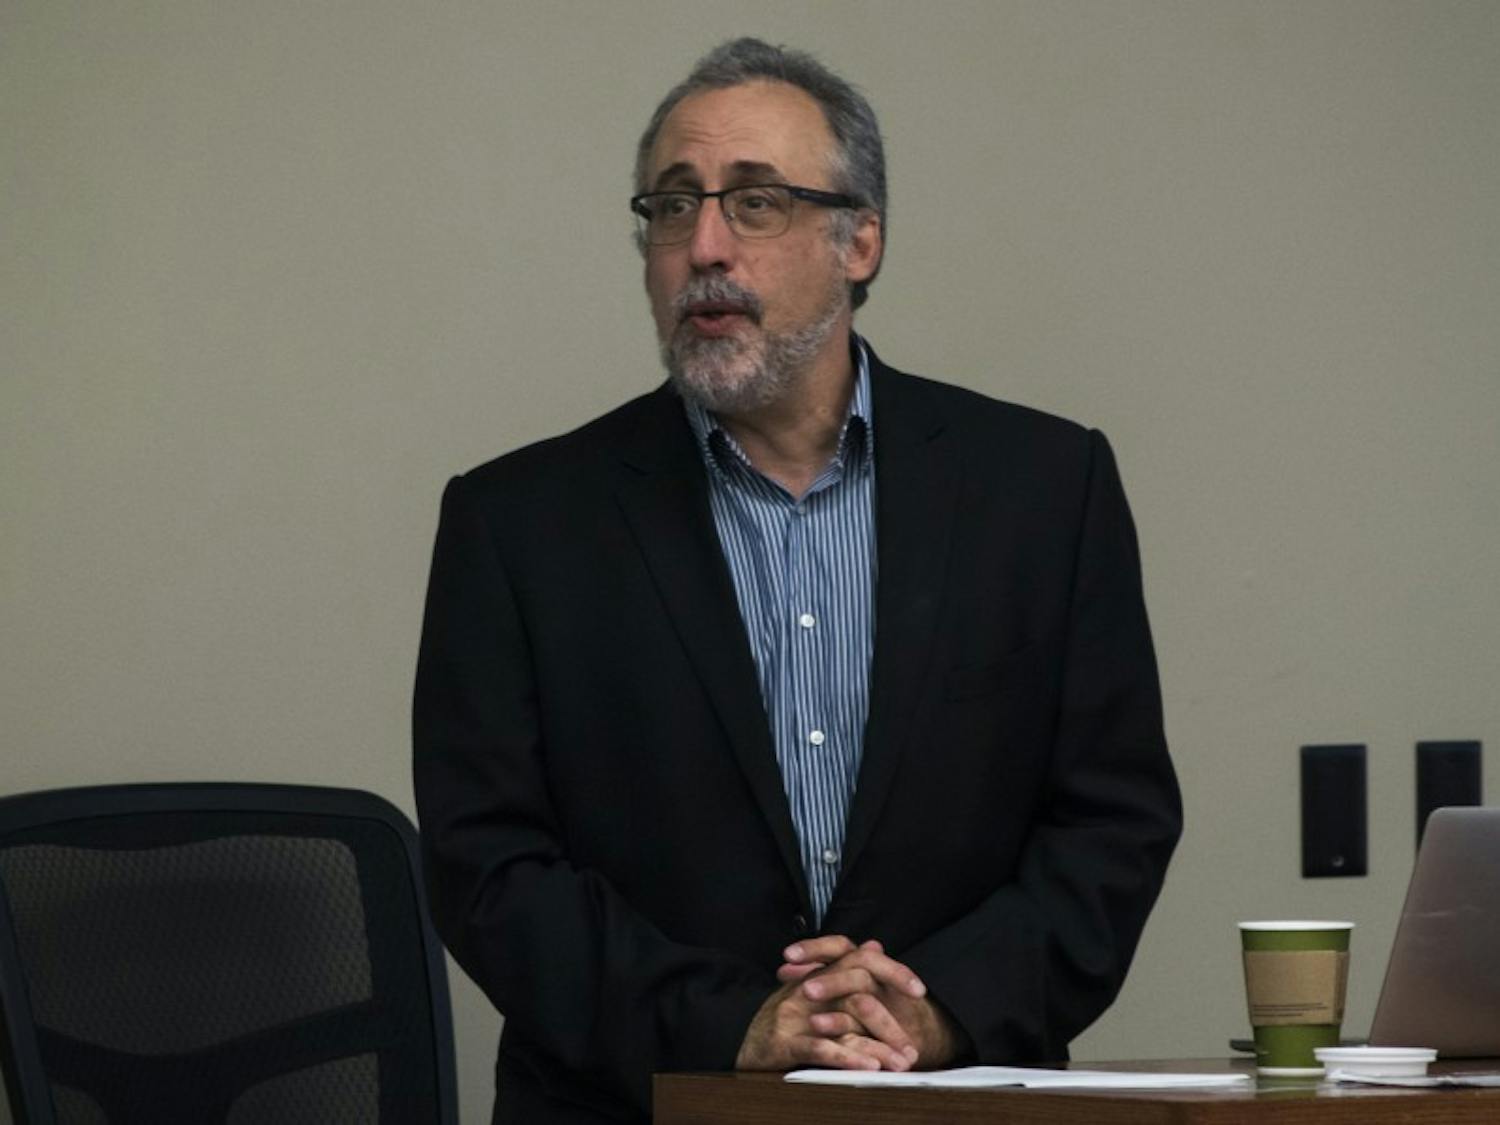 Professor Howard Schweber led a discussion on free speech issues Monday.